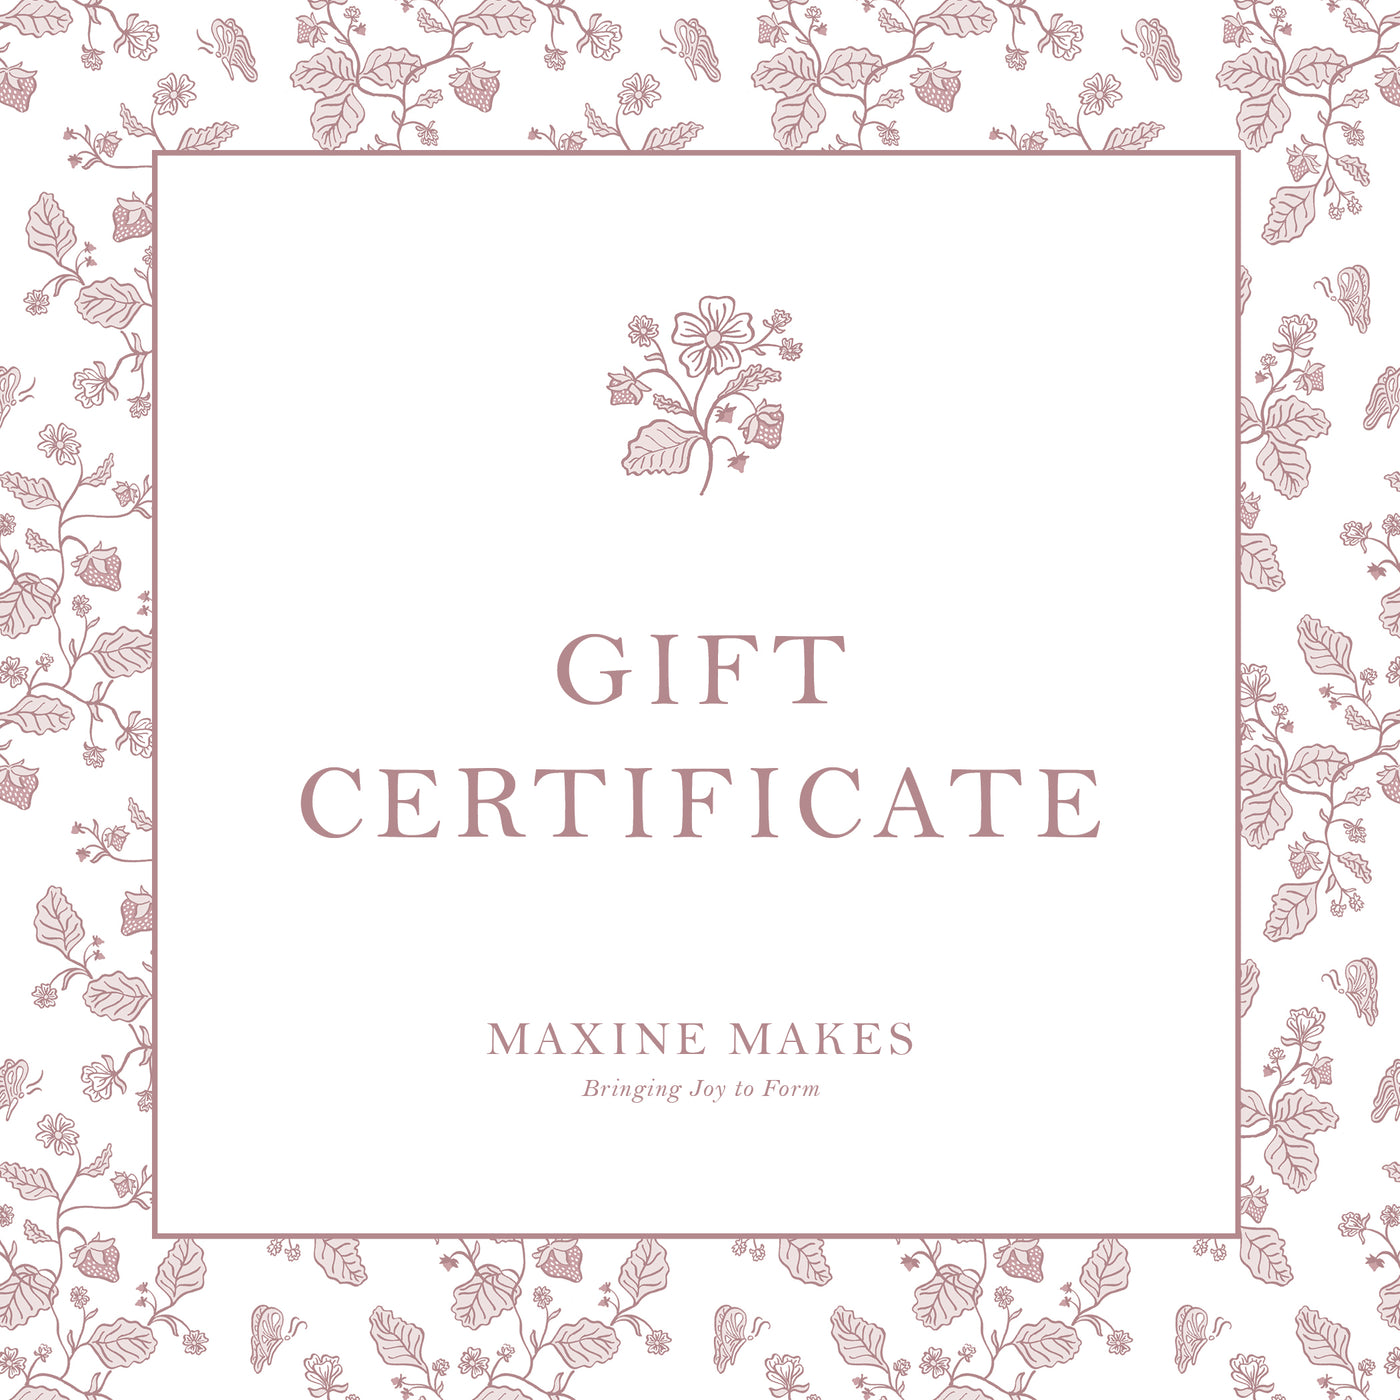 Maxine Makes Gift Certificate - Maxine Makes